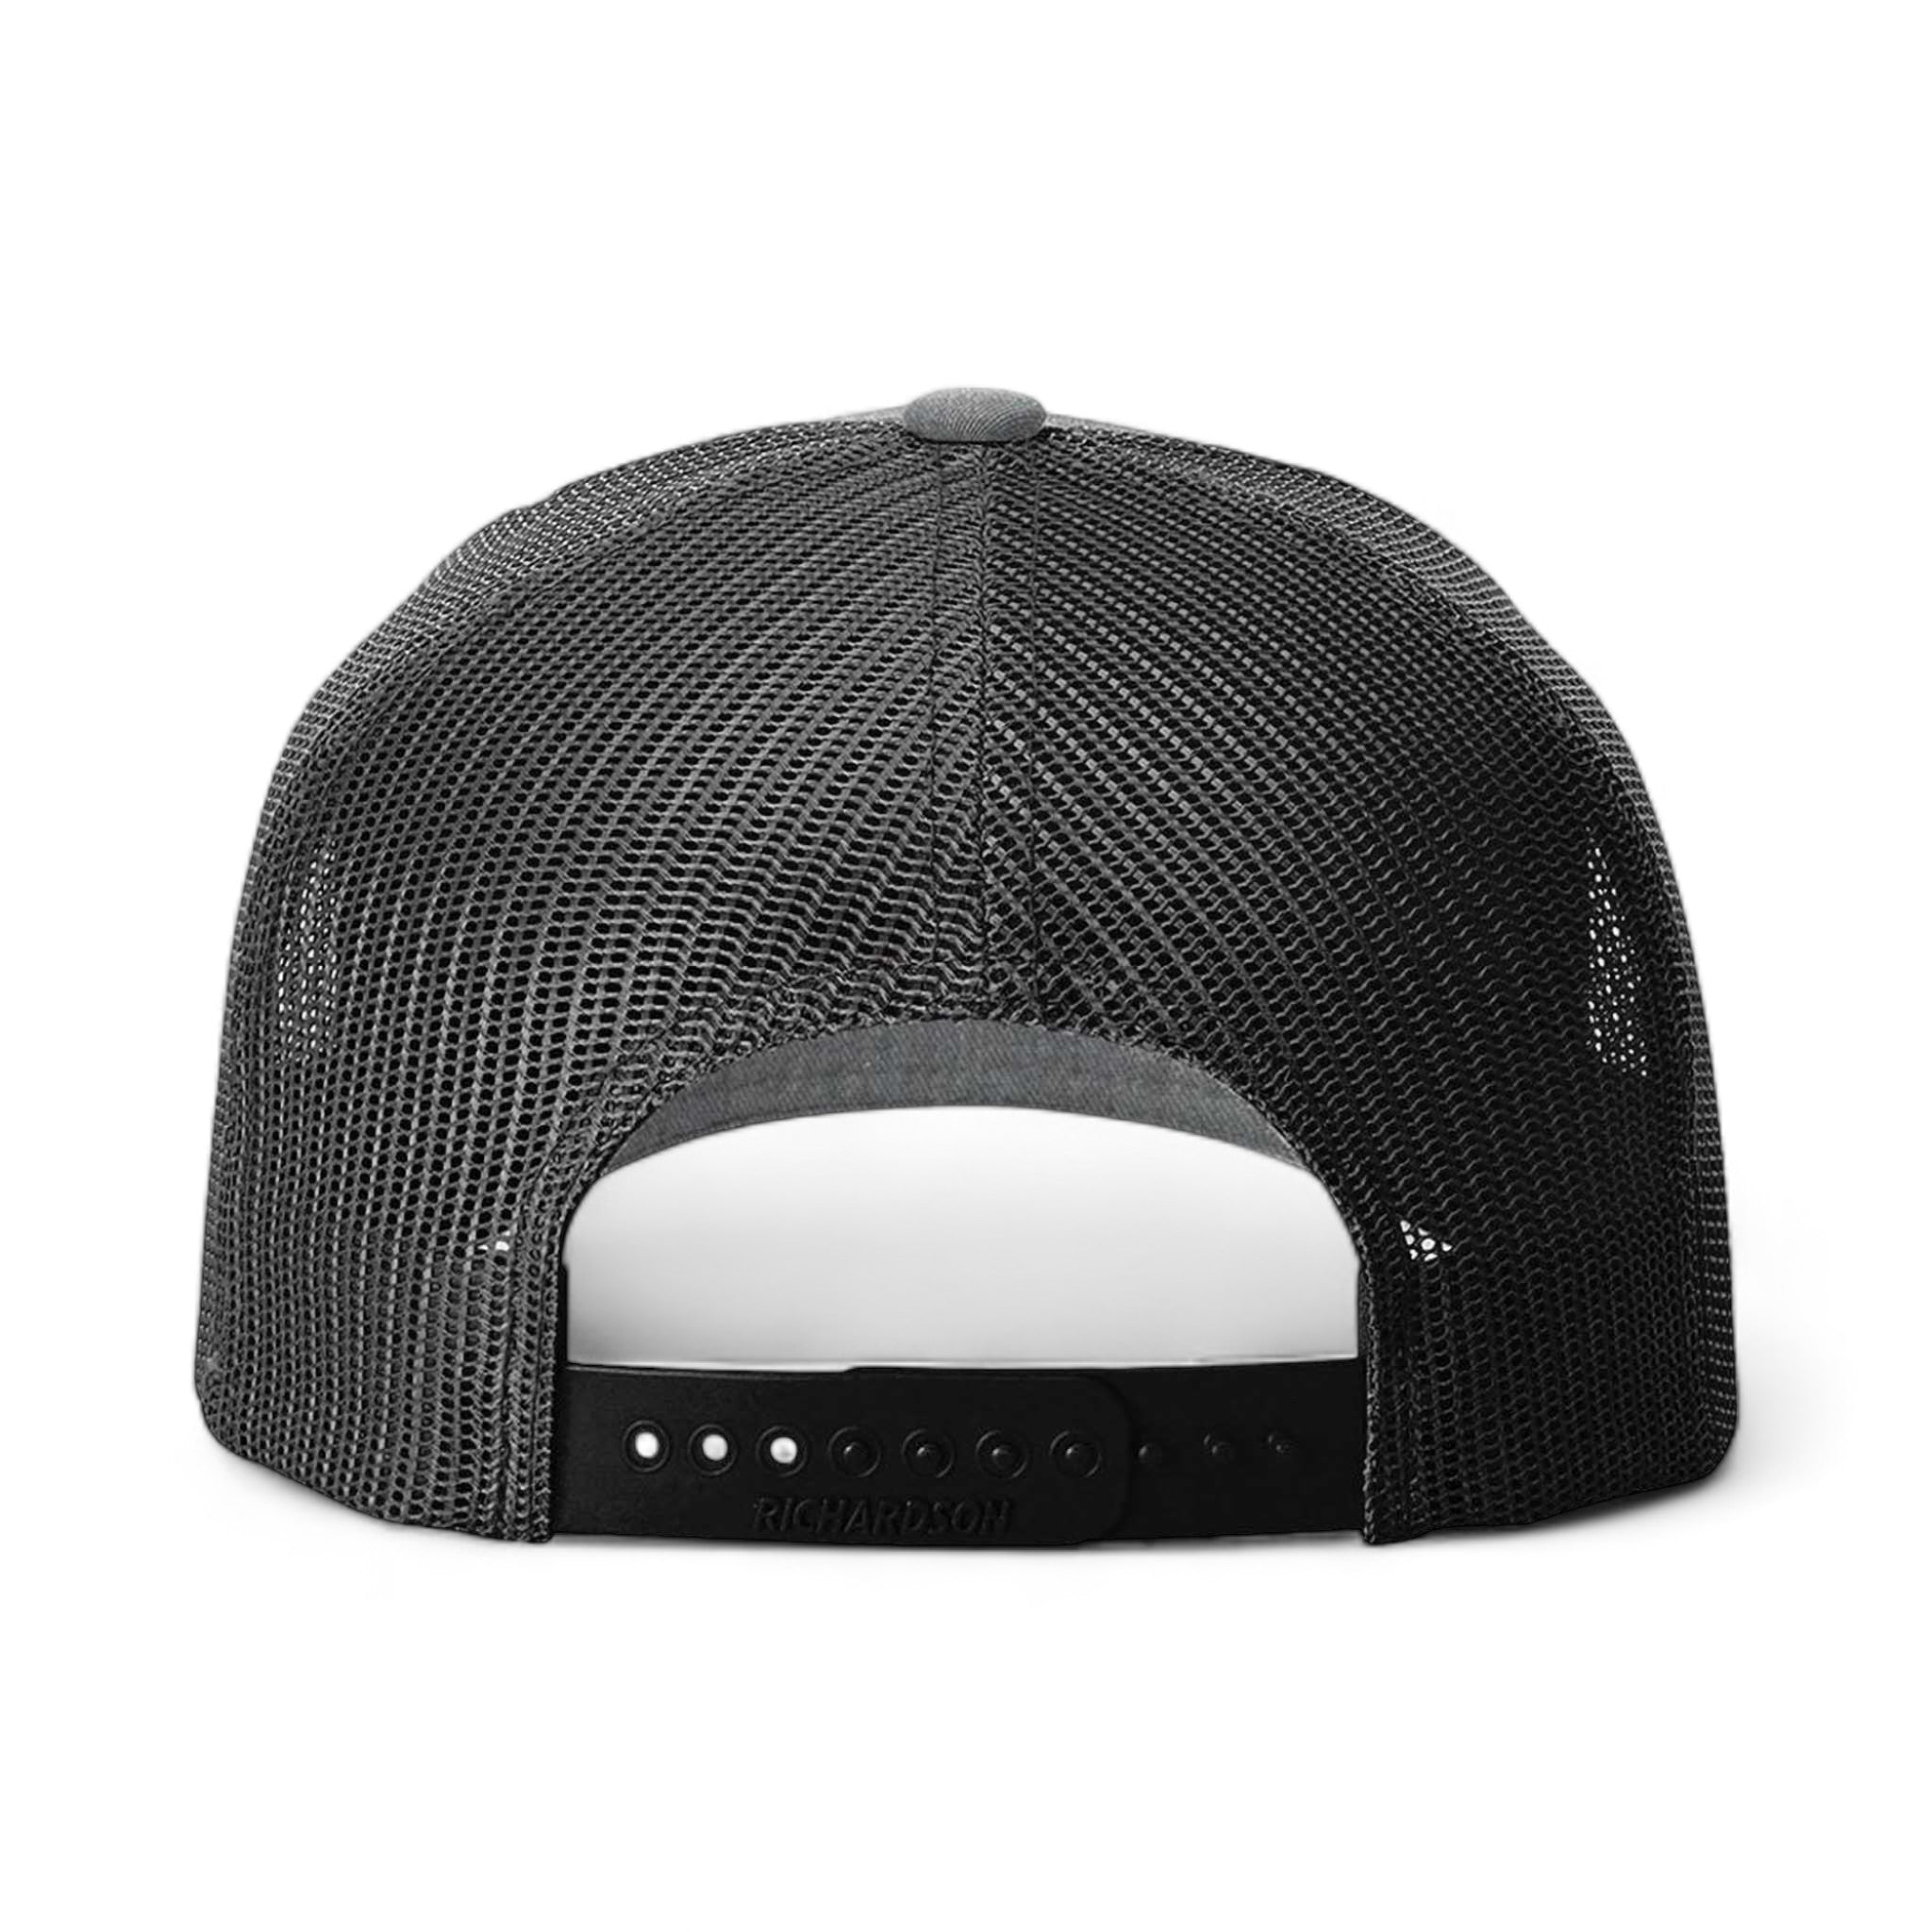 Back view of Richardson 112FPR custom hat in heather grey and black